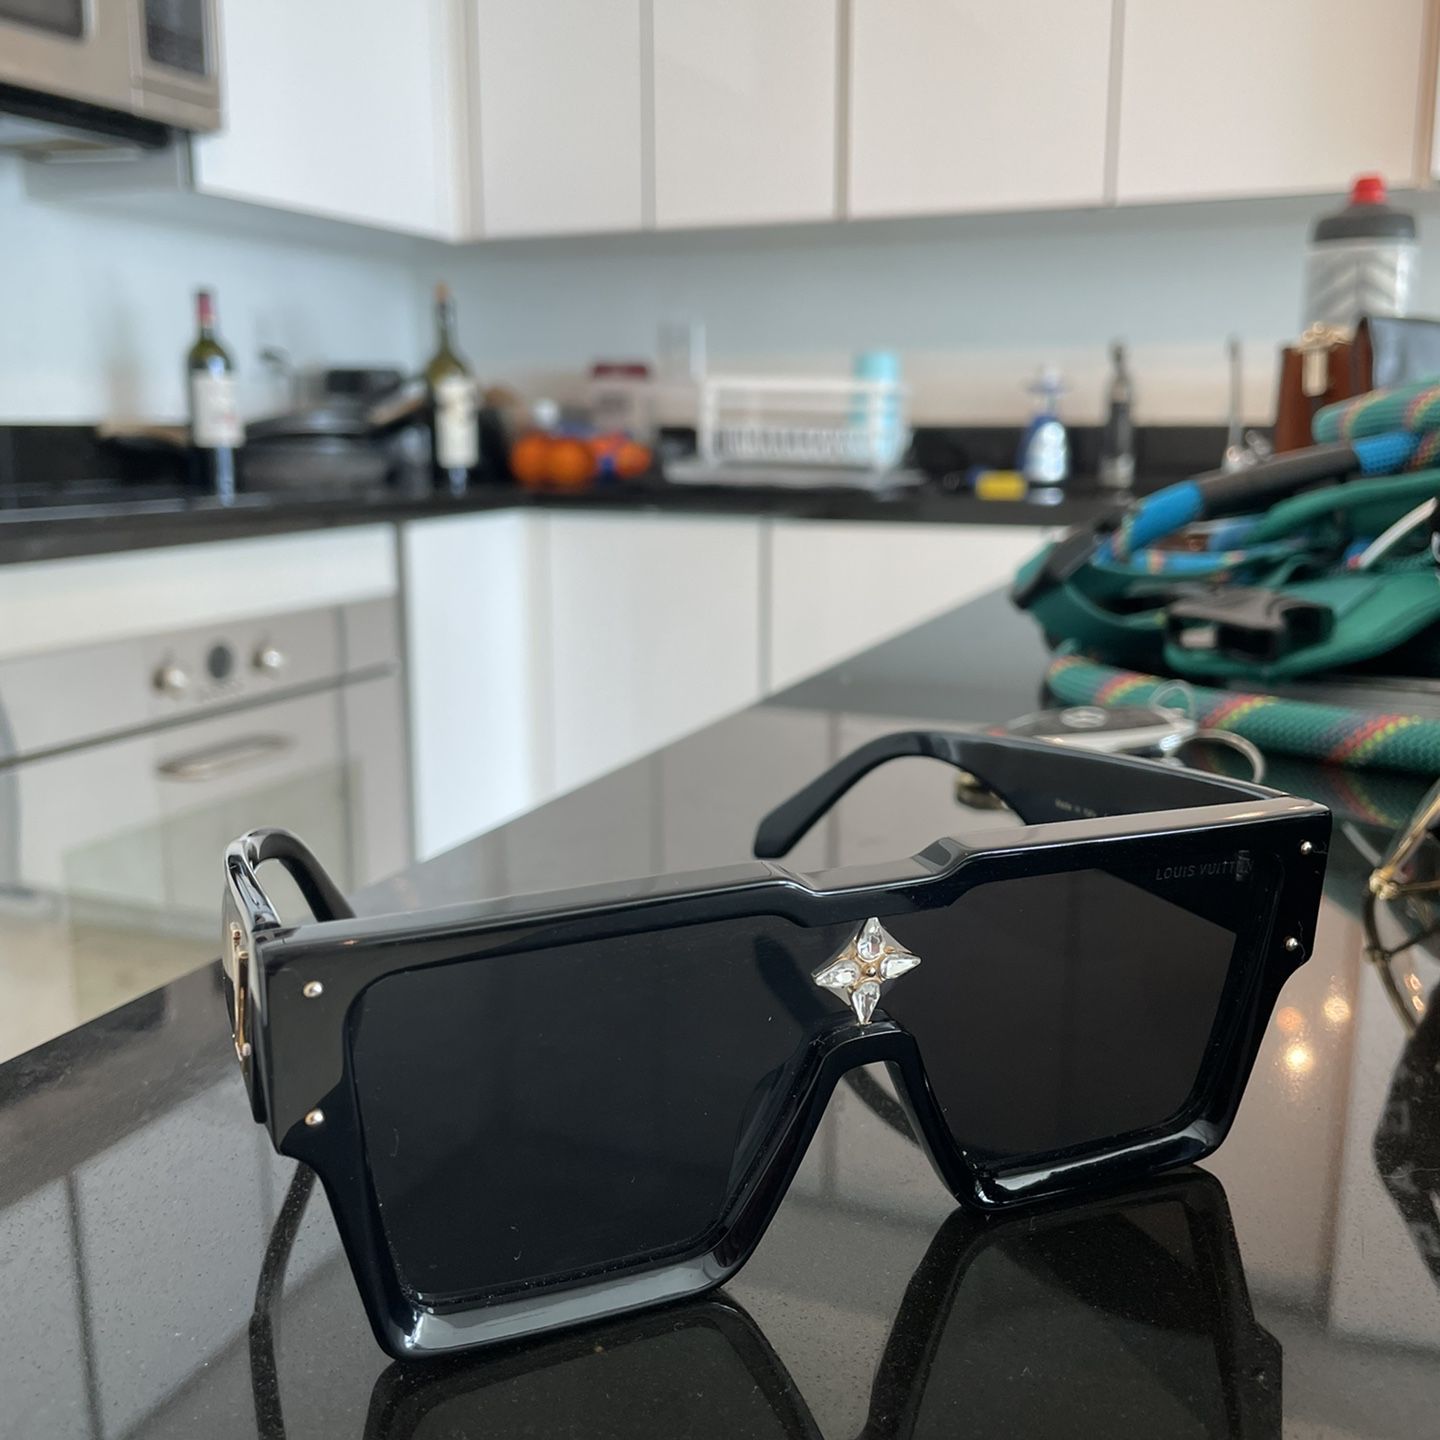 Louis Vuitton Cyclone Shades All Black for Sale in Orange, CA - OfferUp